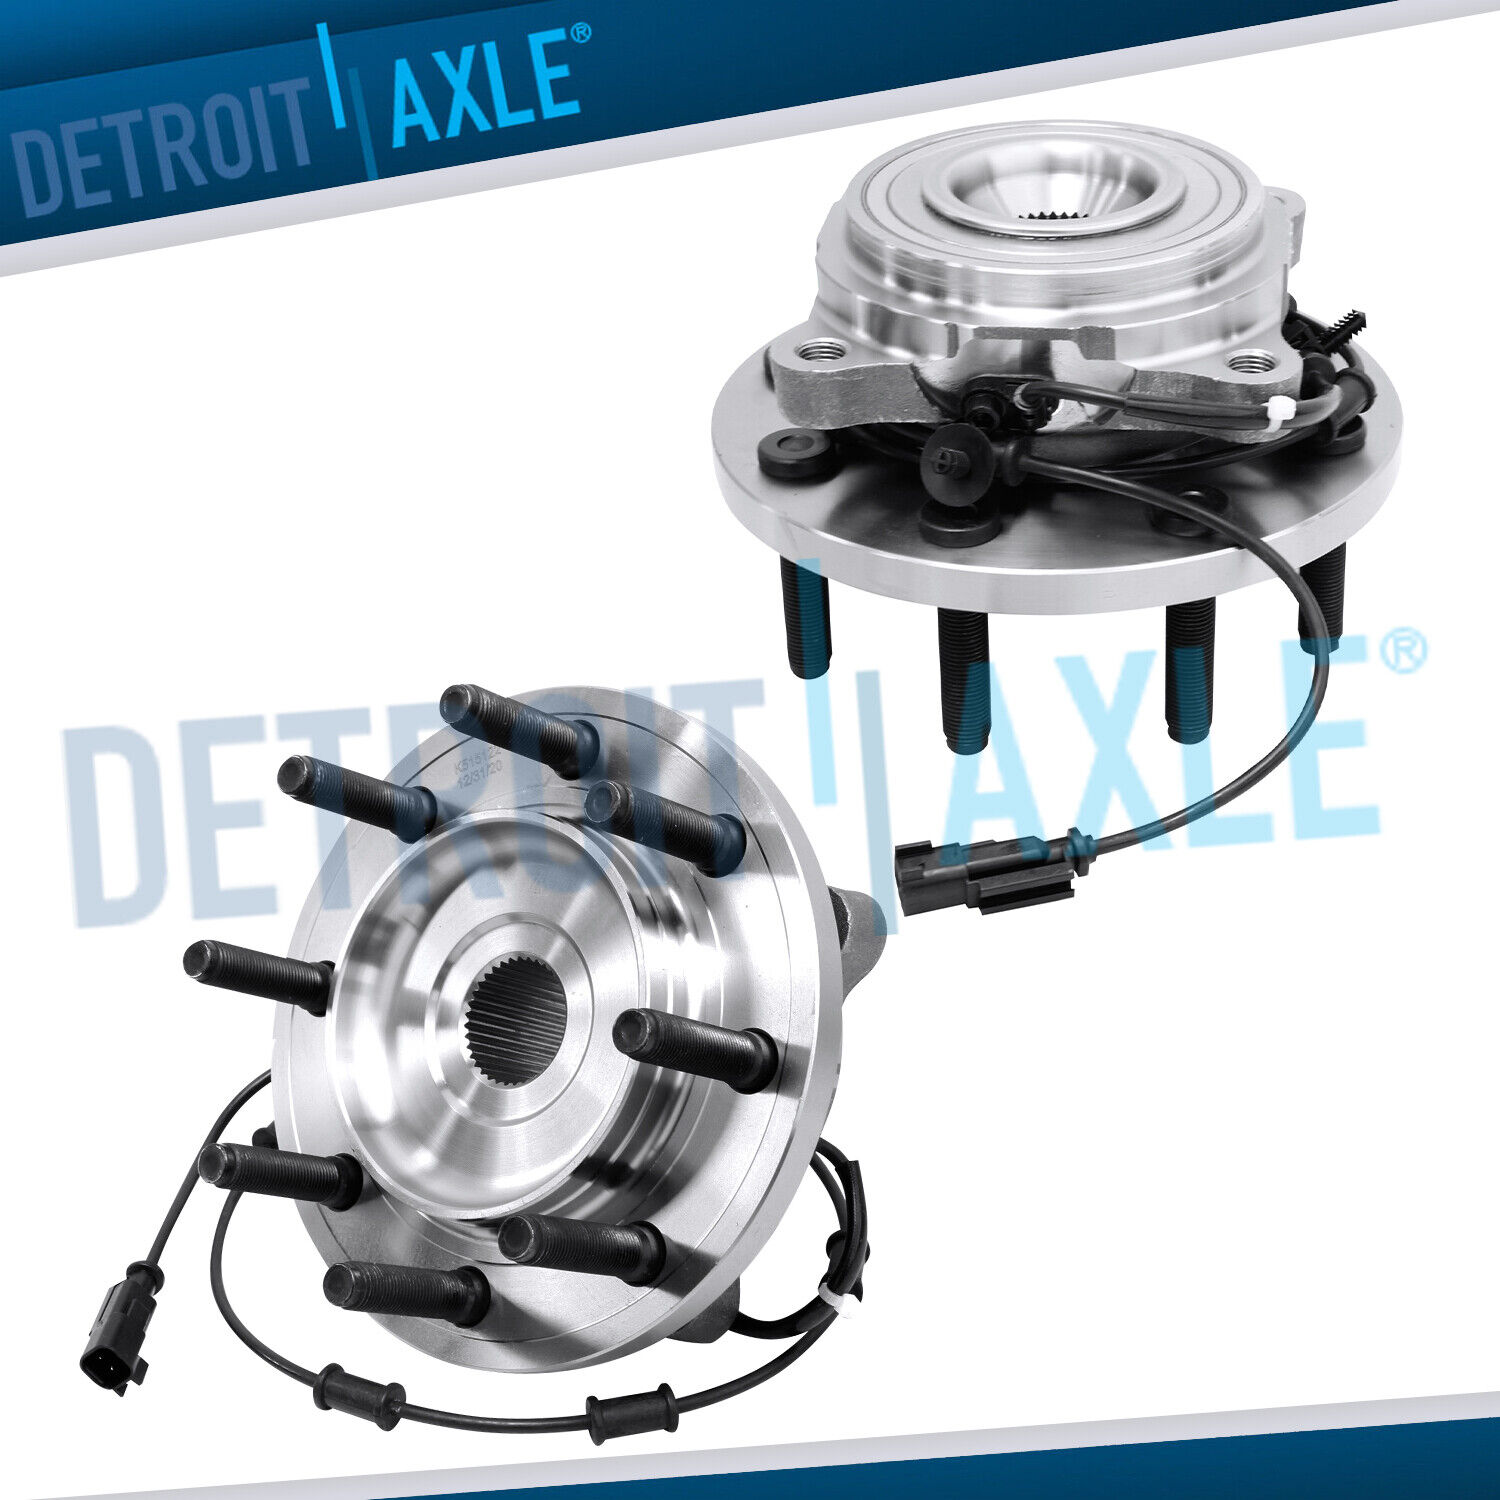 4WD Pair Front Wheel Bearing & Hub for 2009 2010 2011 Dodge Ram 2500 3500 w/ ABS